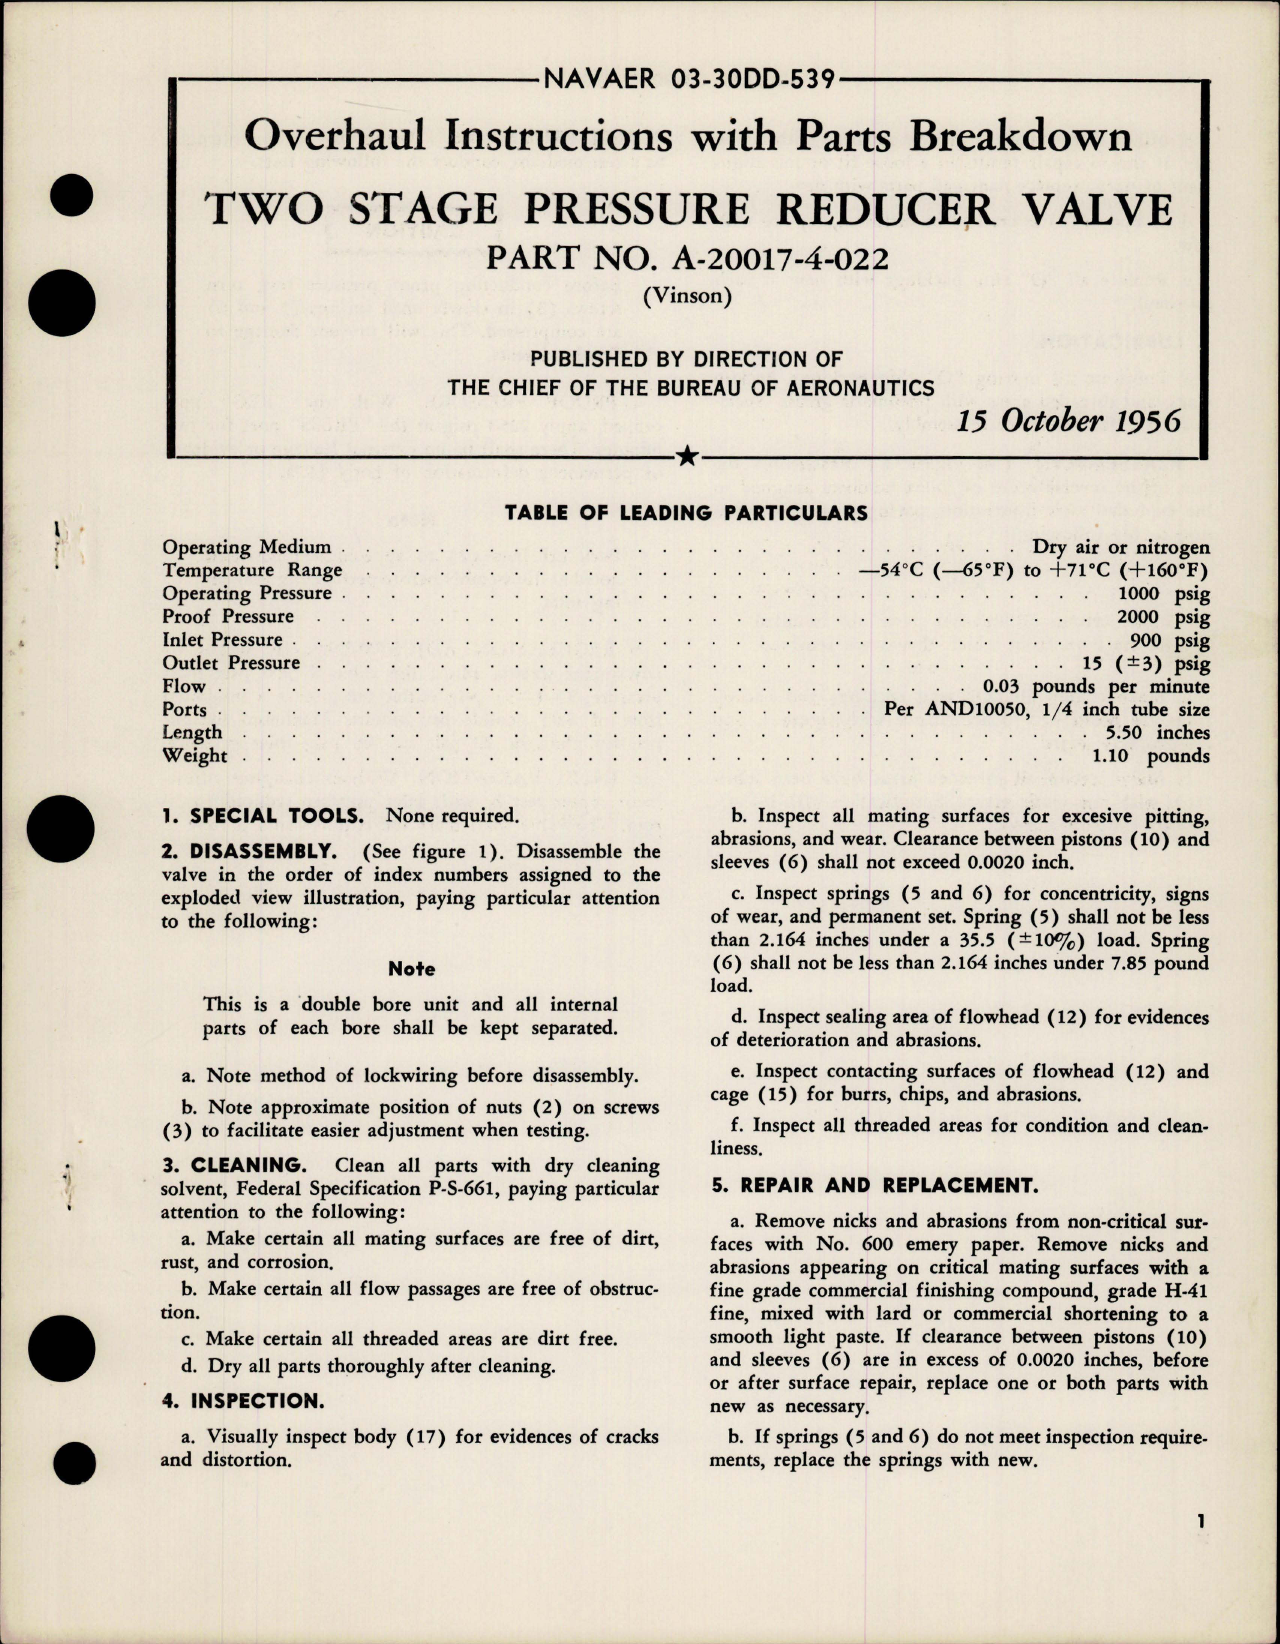 Sample page 1 from AirCorps Library document: Overhaul Instructions with Parts Breakdown for Two Stage Pressure Reducer Valve - Part A-20017-4-022